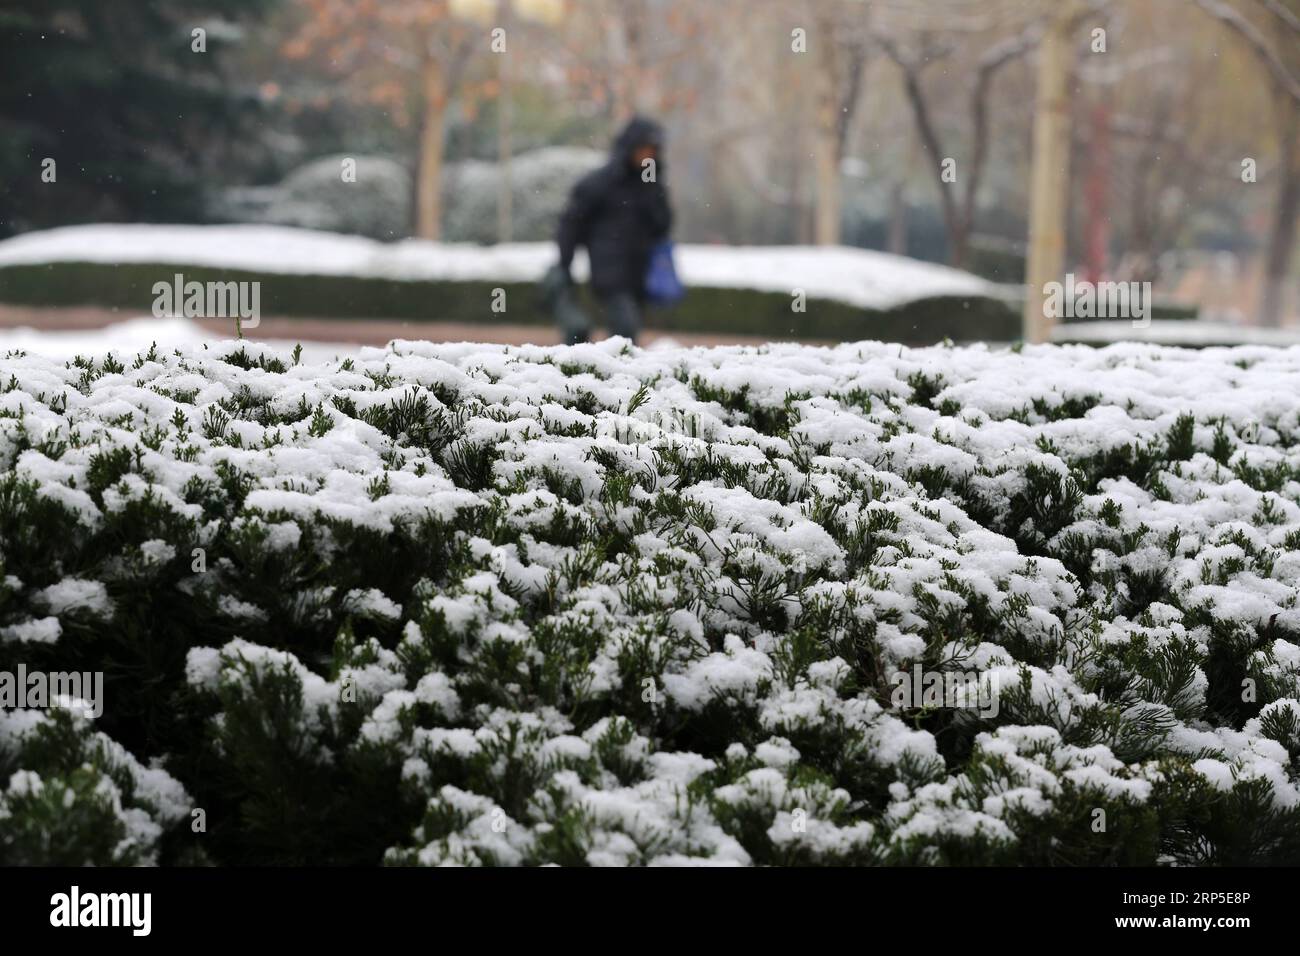 (181211) -- WEIFANG, Dec. 11, 2018 -- The roadside plant is covered with snow in Weifang City, east China s Shandong Province, Dec. 11, 2018. Parts of Shandong Province met snow on Tuesday. )(ly) CHINA-SHANDONG-SNOW (CN) ZhangxChi PUBLICATIONxNOTxINxCHN Stock Photo